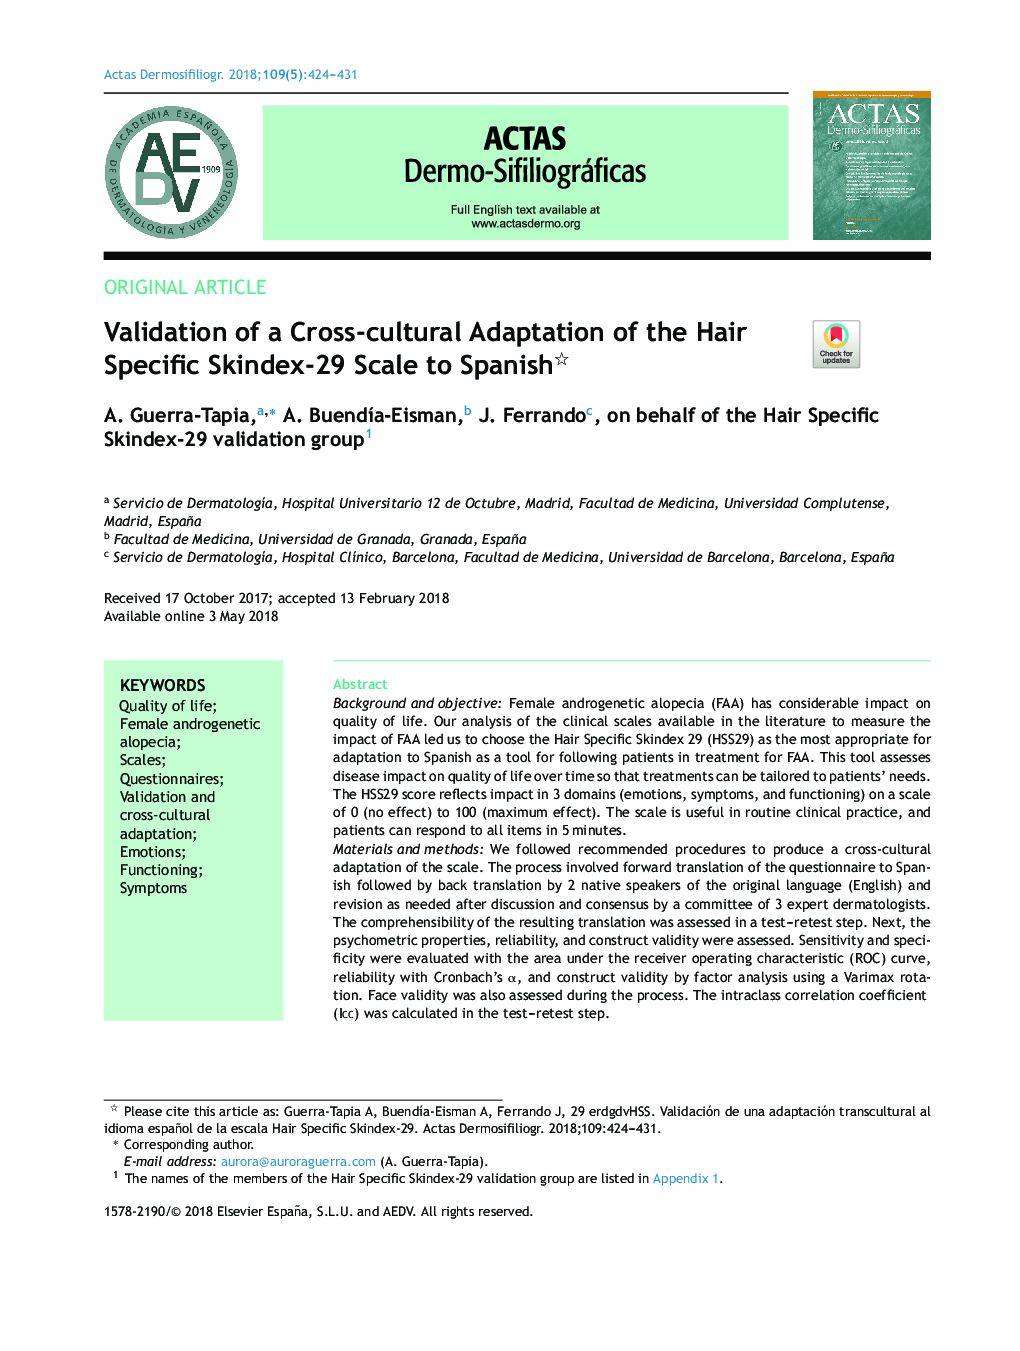 Validation of a Cross-cultural Adaptation of the Hair Specific Skindex-29 Scale to Spanish